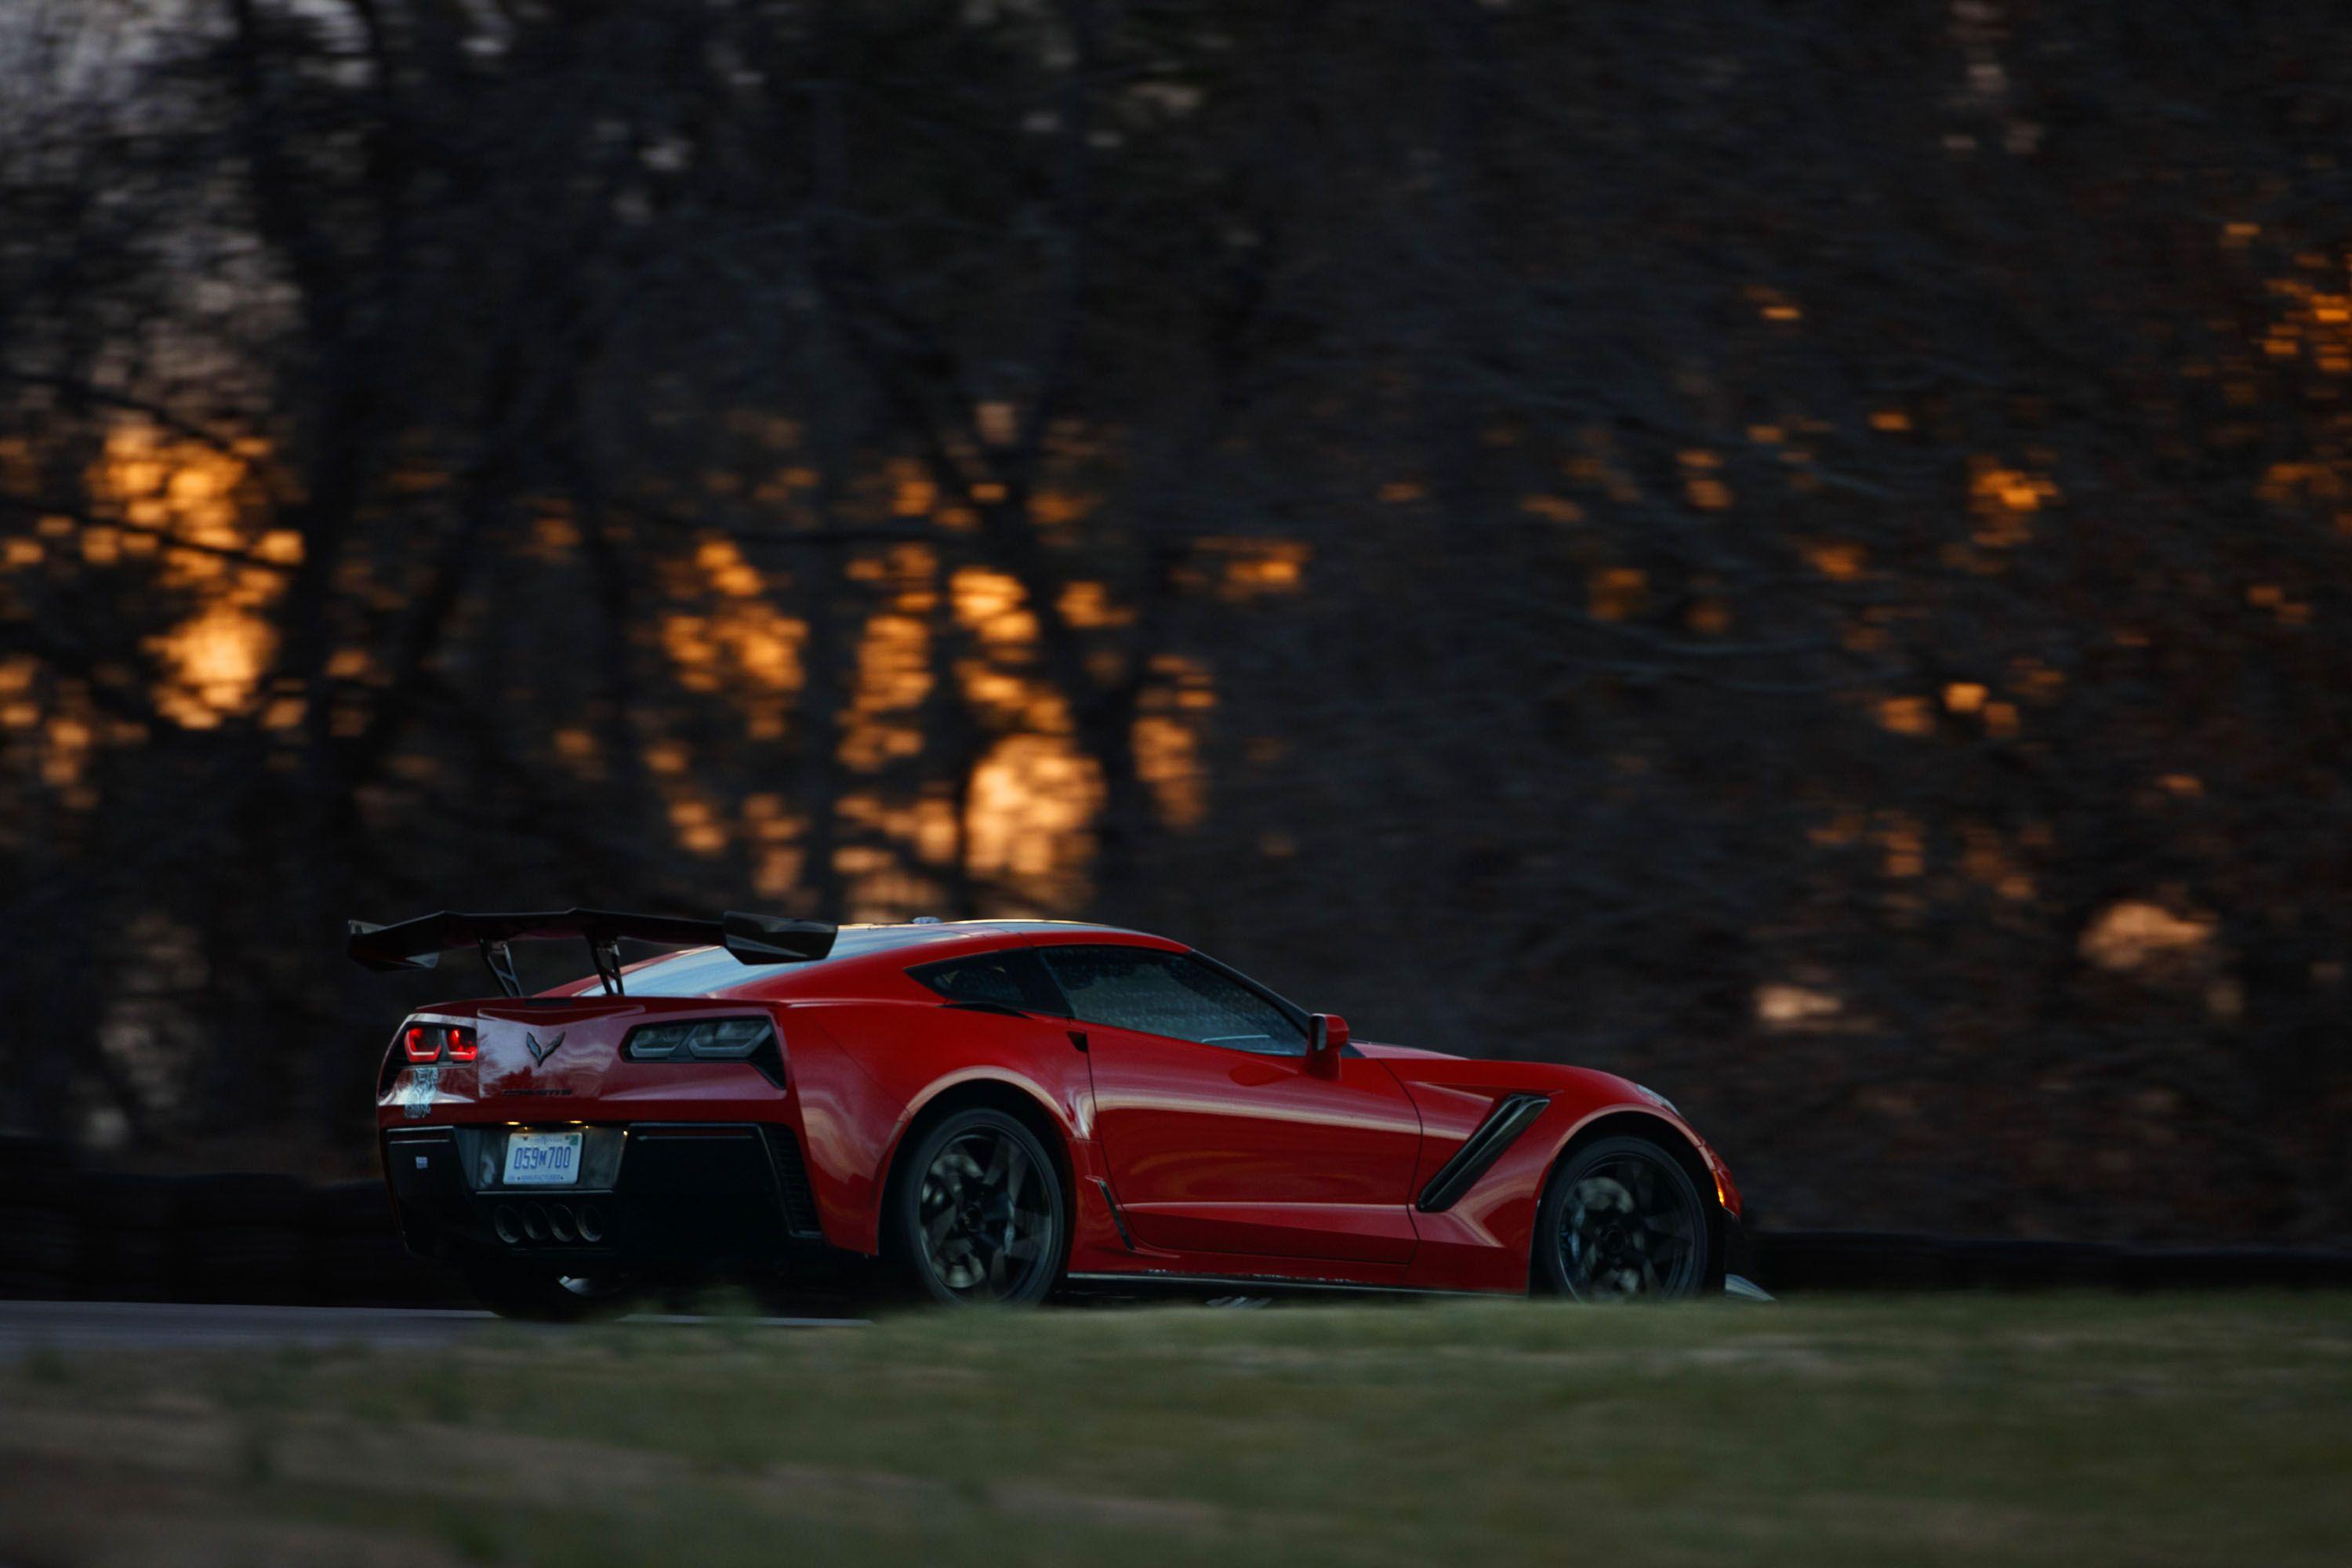 Wallpaper Of The Day: 2019 Chevy Corvette ZR1 Picture